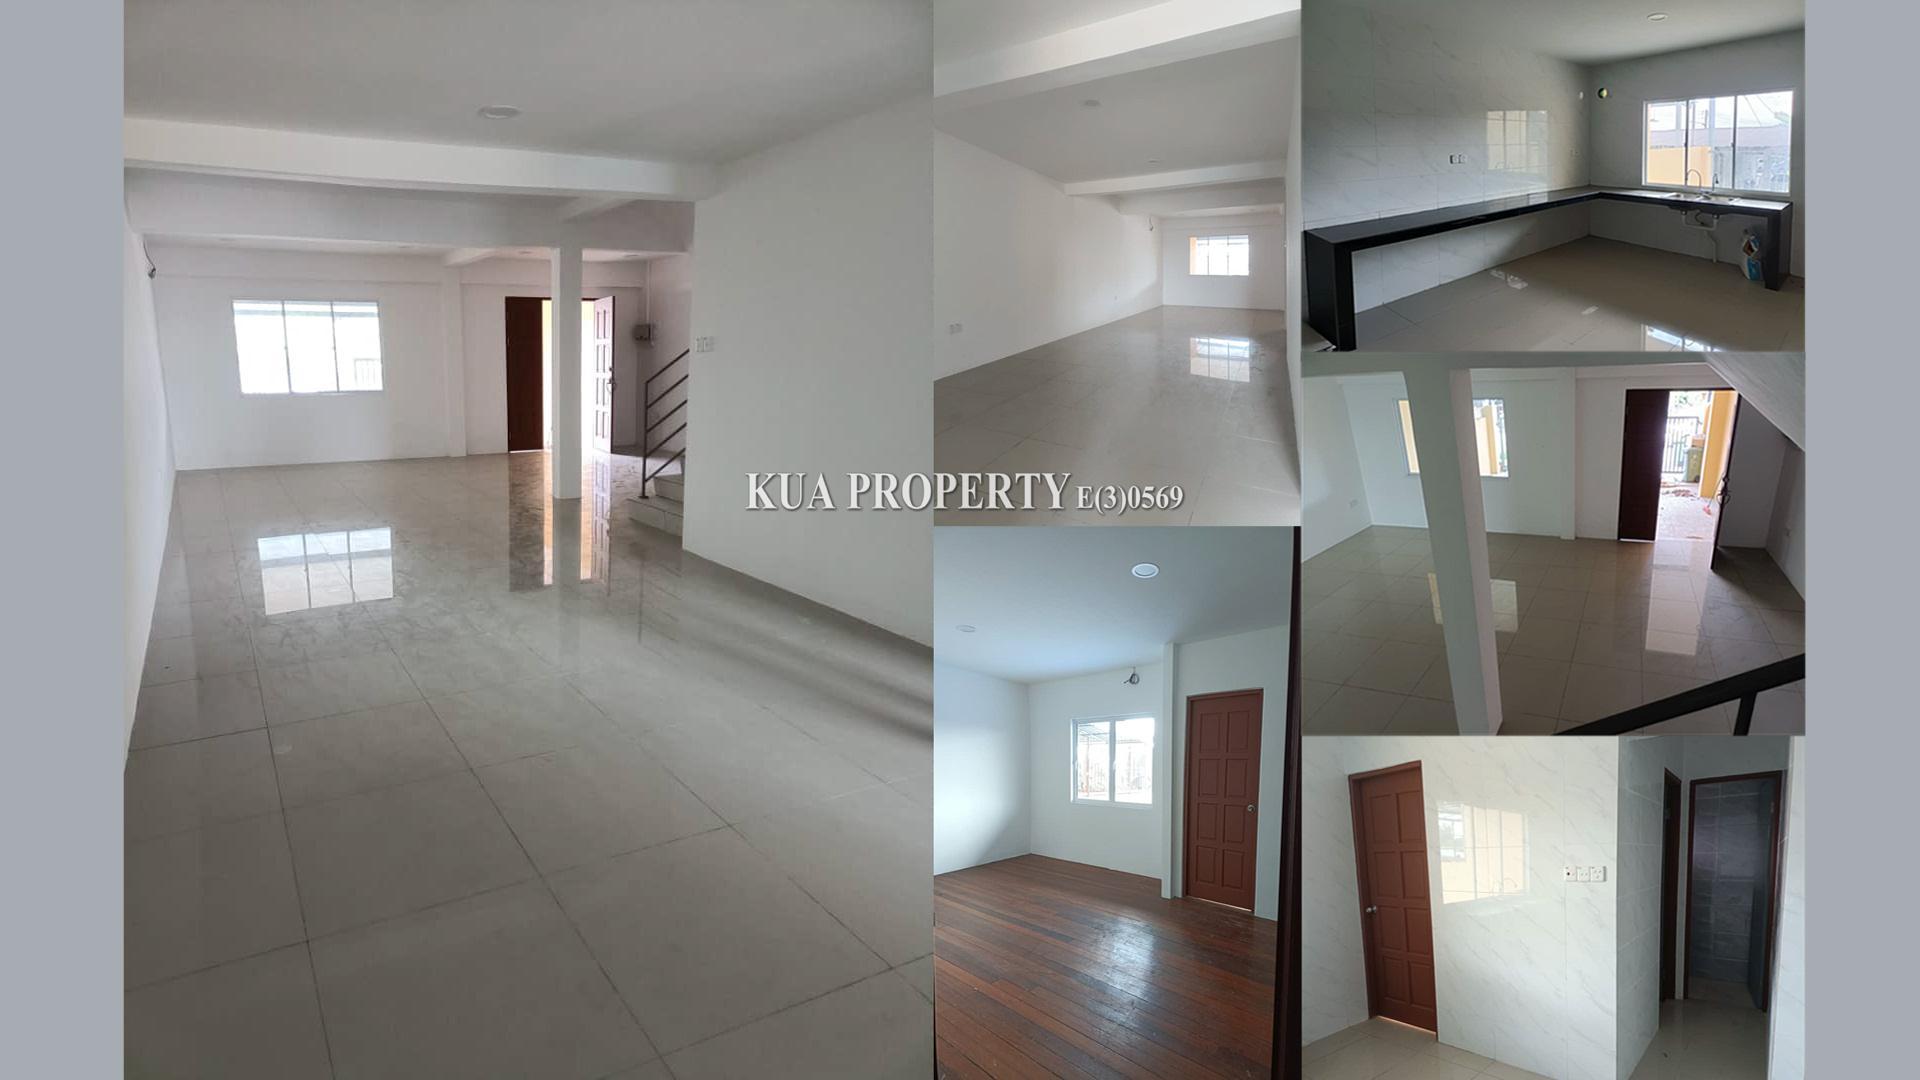 Double Storey Terrace Intermediate House For Sale! at Three Hills Park, Kuching